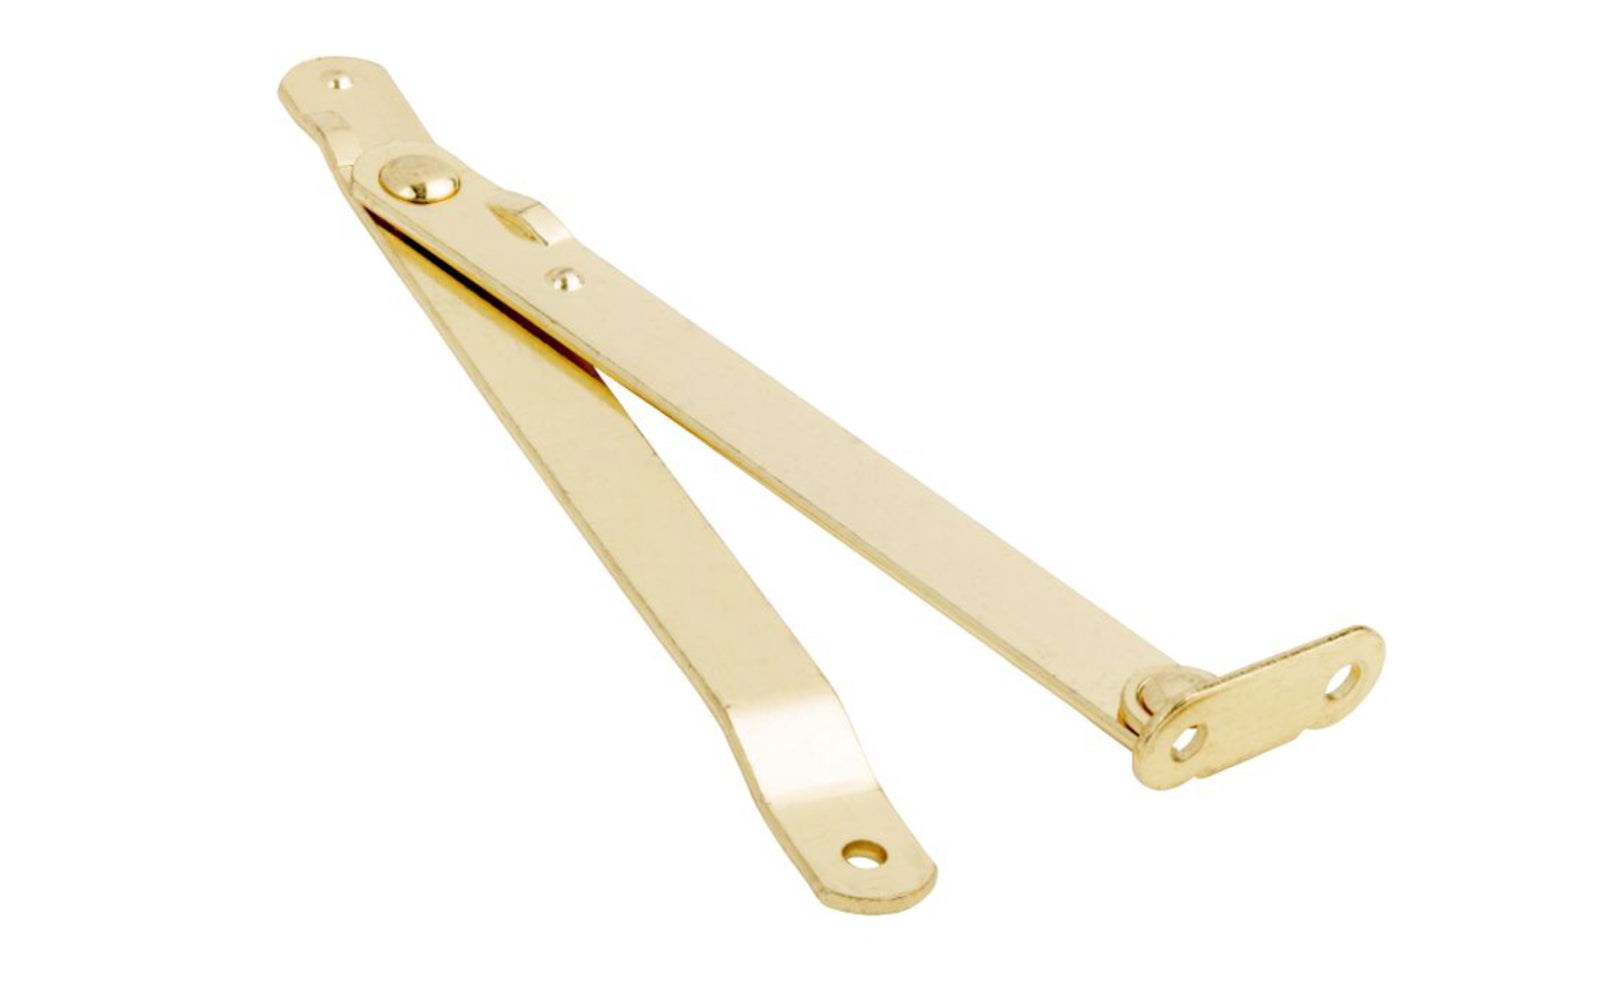 This brass-plated steel folding support is designed to support table legs, shelves, chest lids, & more. Prevents lid from slamming. Designed for left side mounting. National Hardware Model No. N208-611. 038613208612